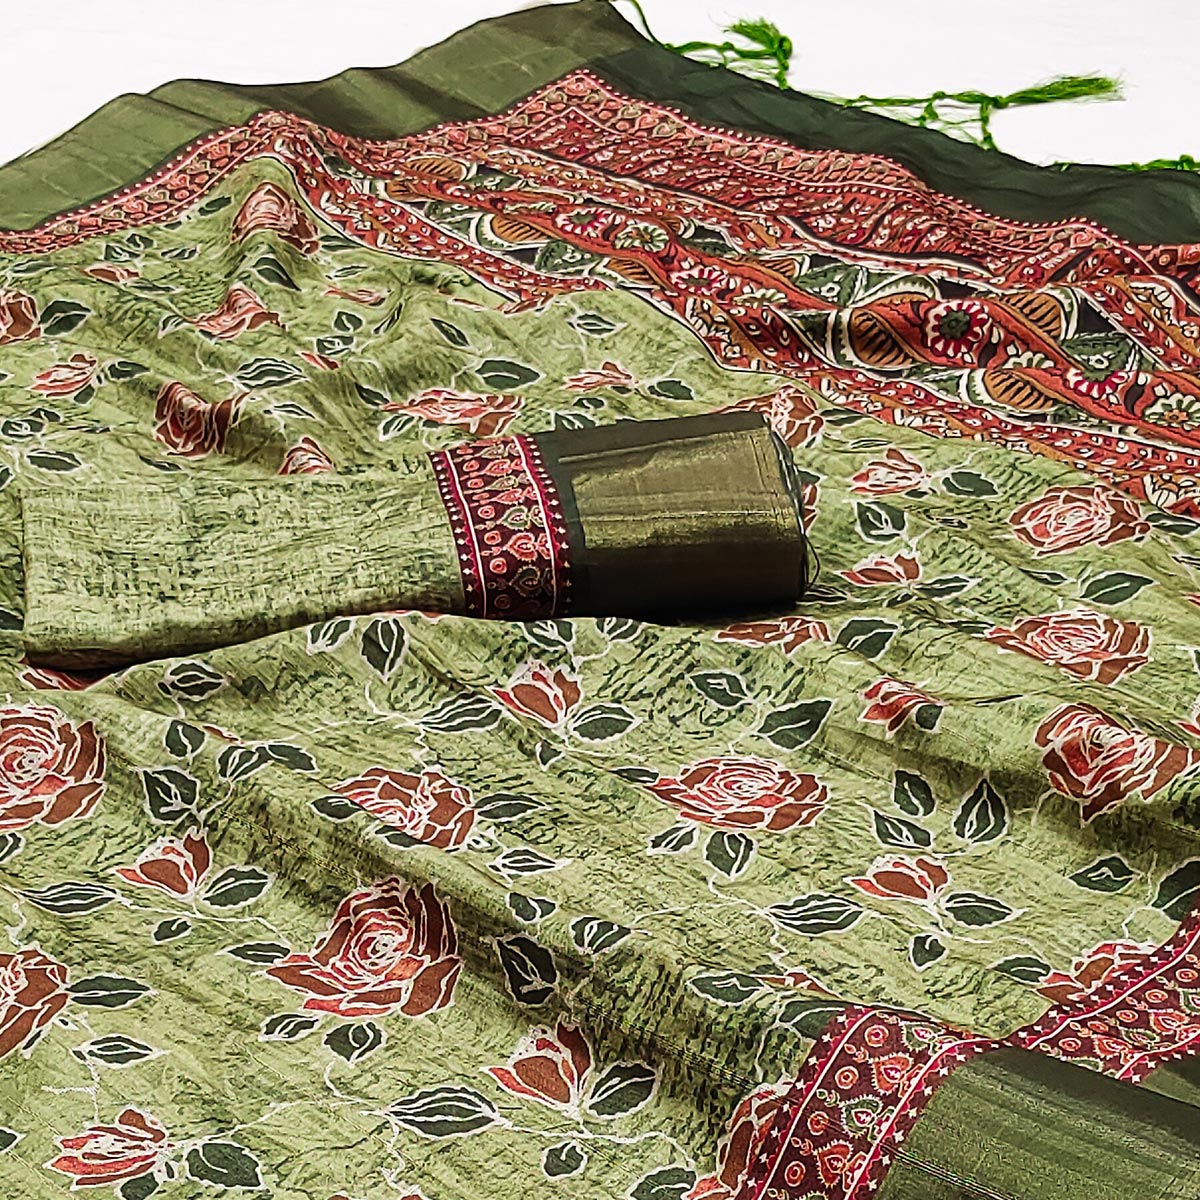 Green Floral Printed Matka Tussar Saree With Tassels